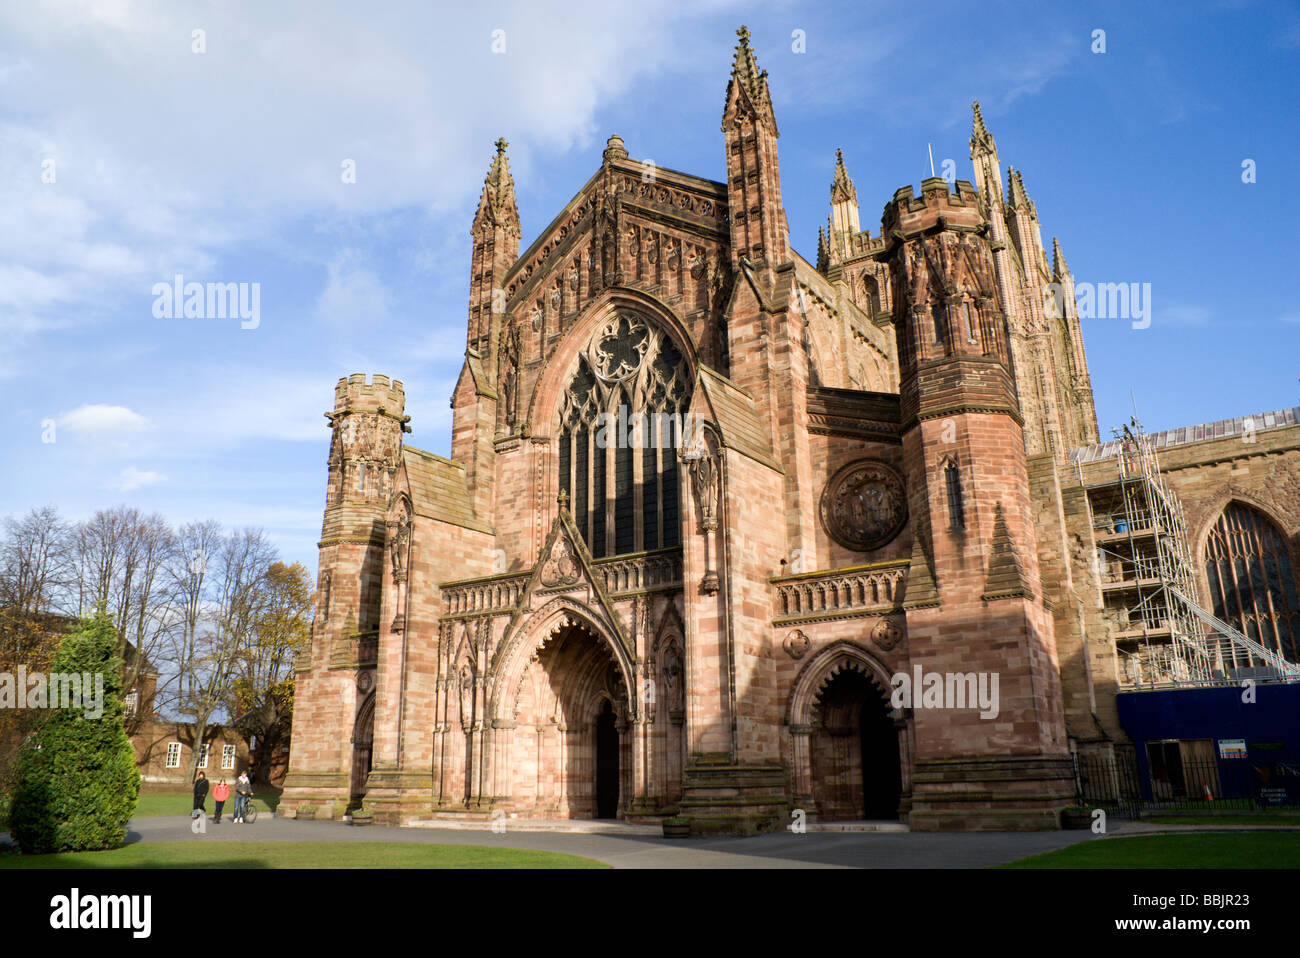 West front of Hereford Cathedral, Hereford, England. Stock Photo